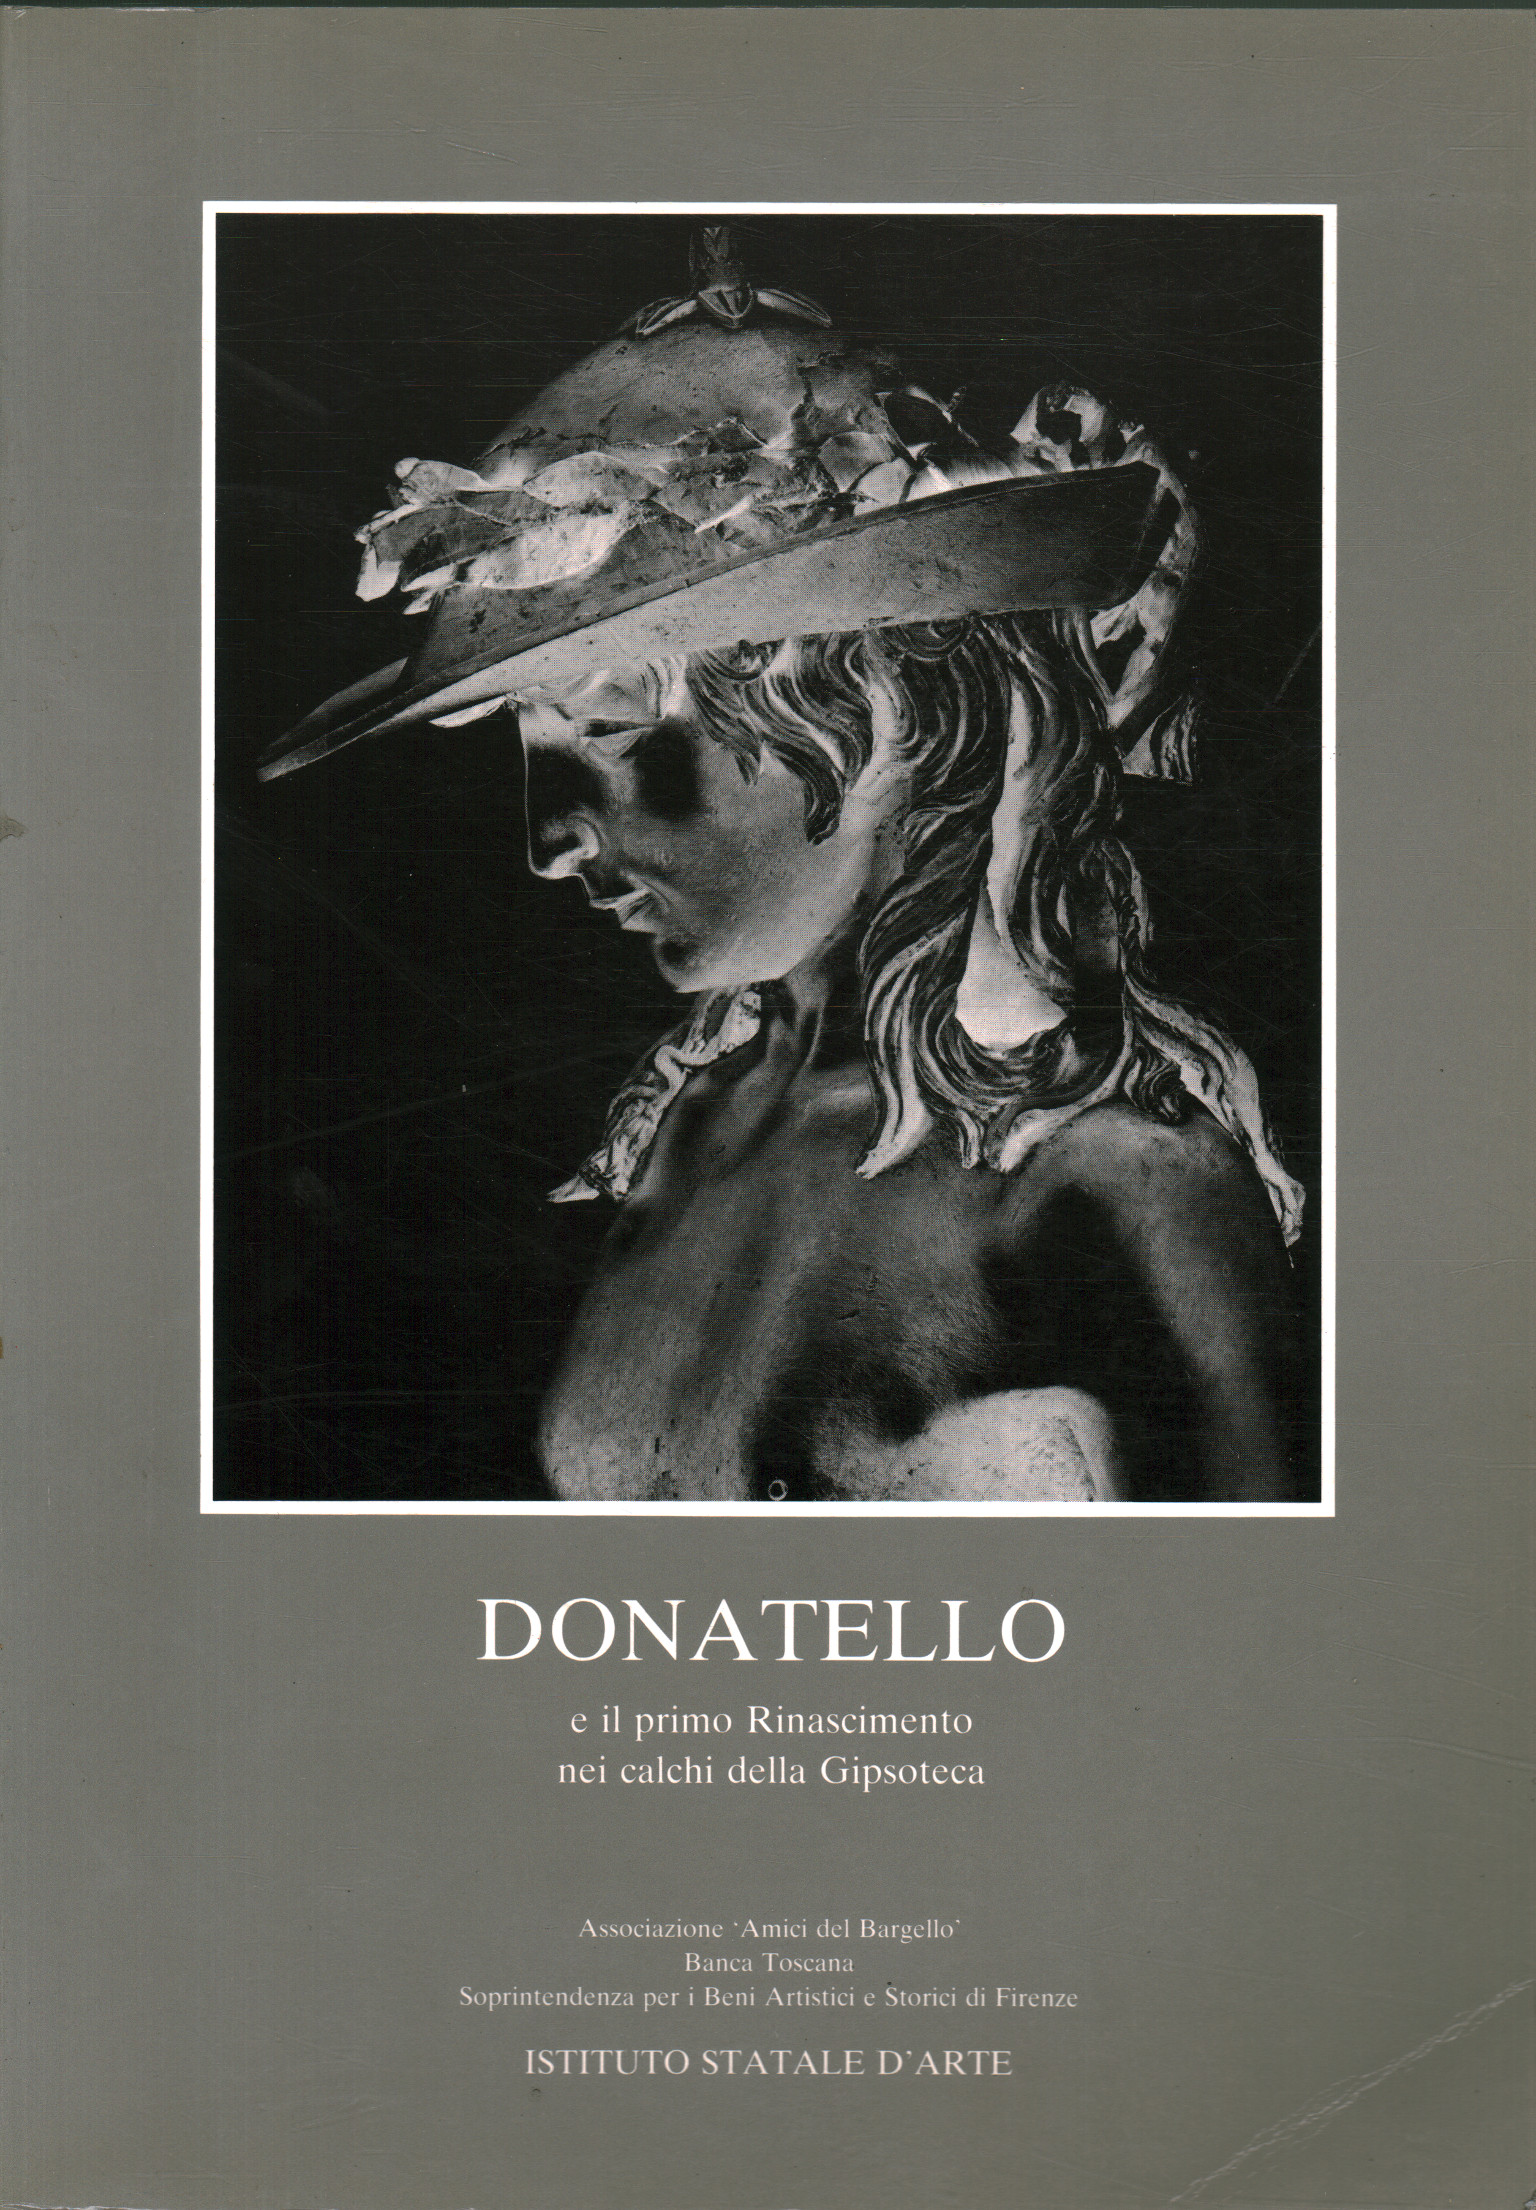 Donatello and the early Renaissance in